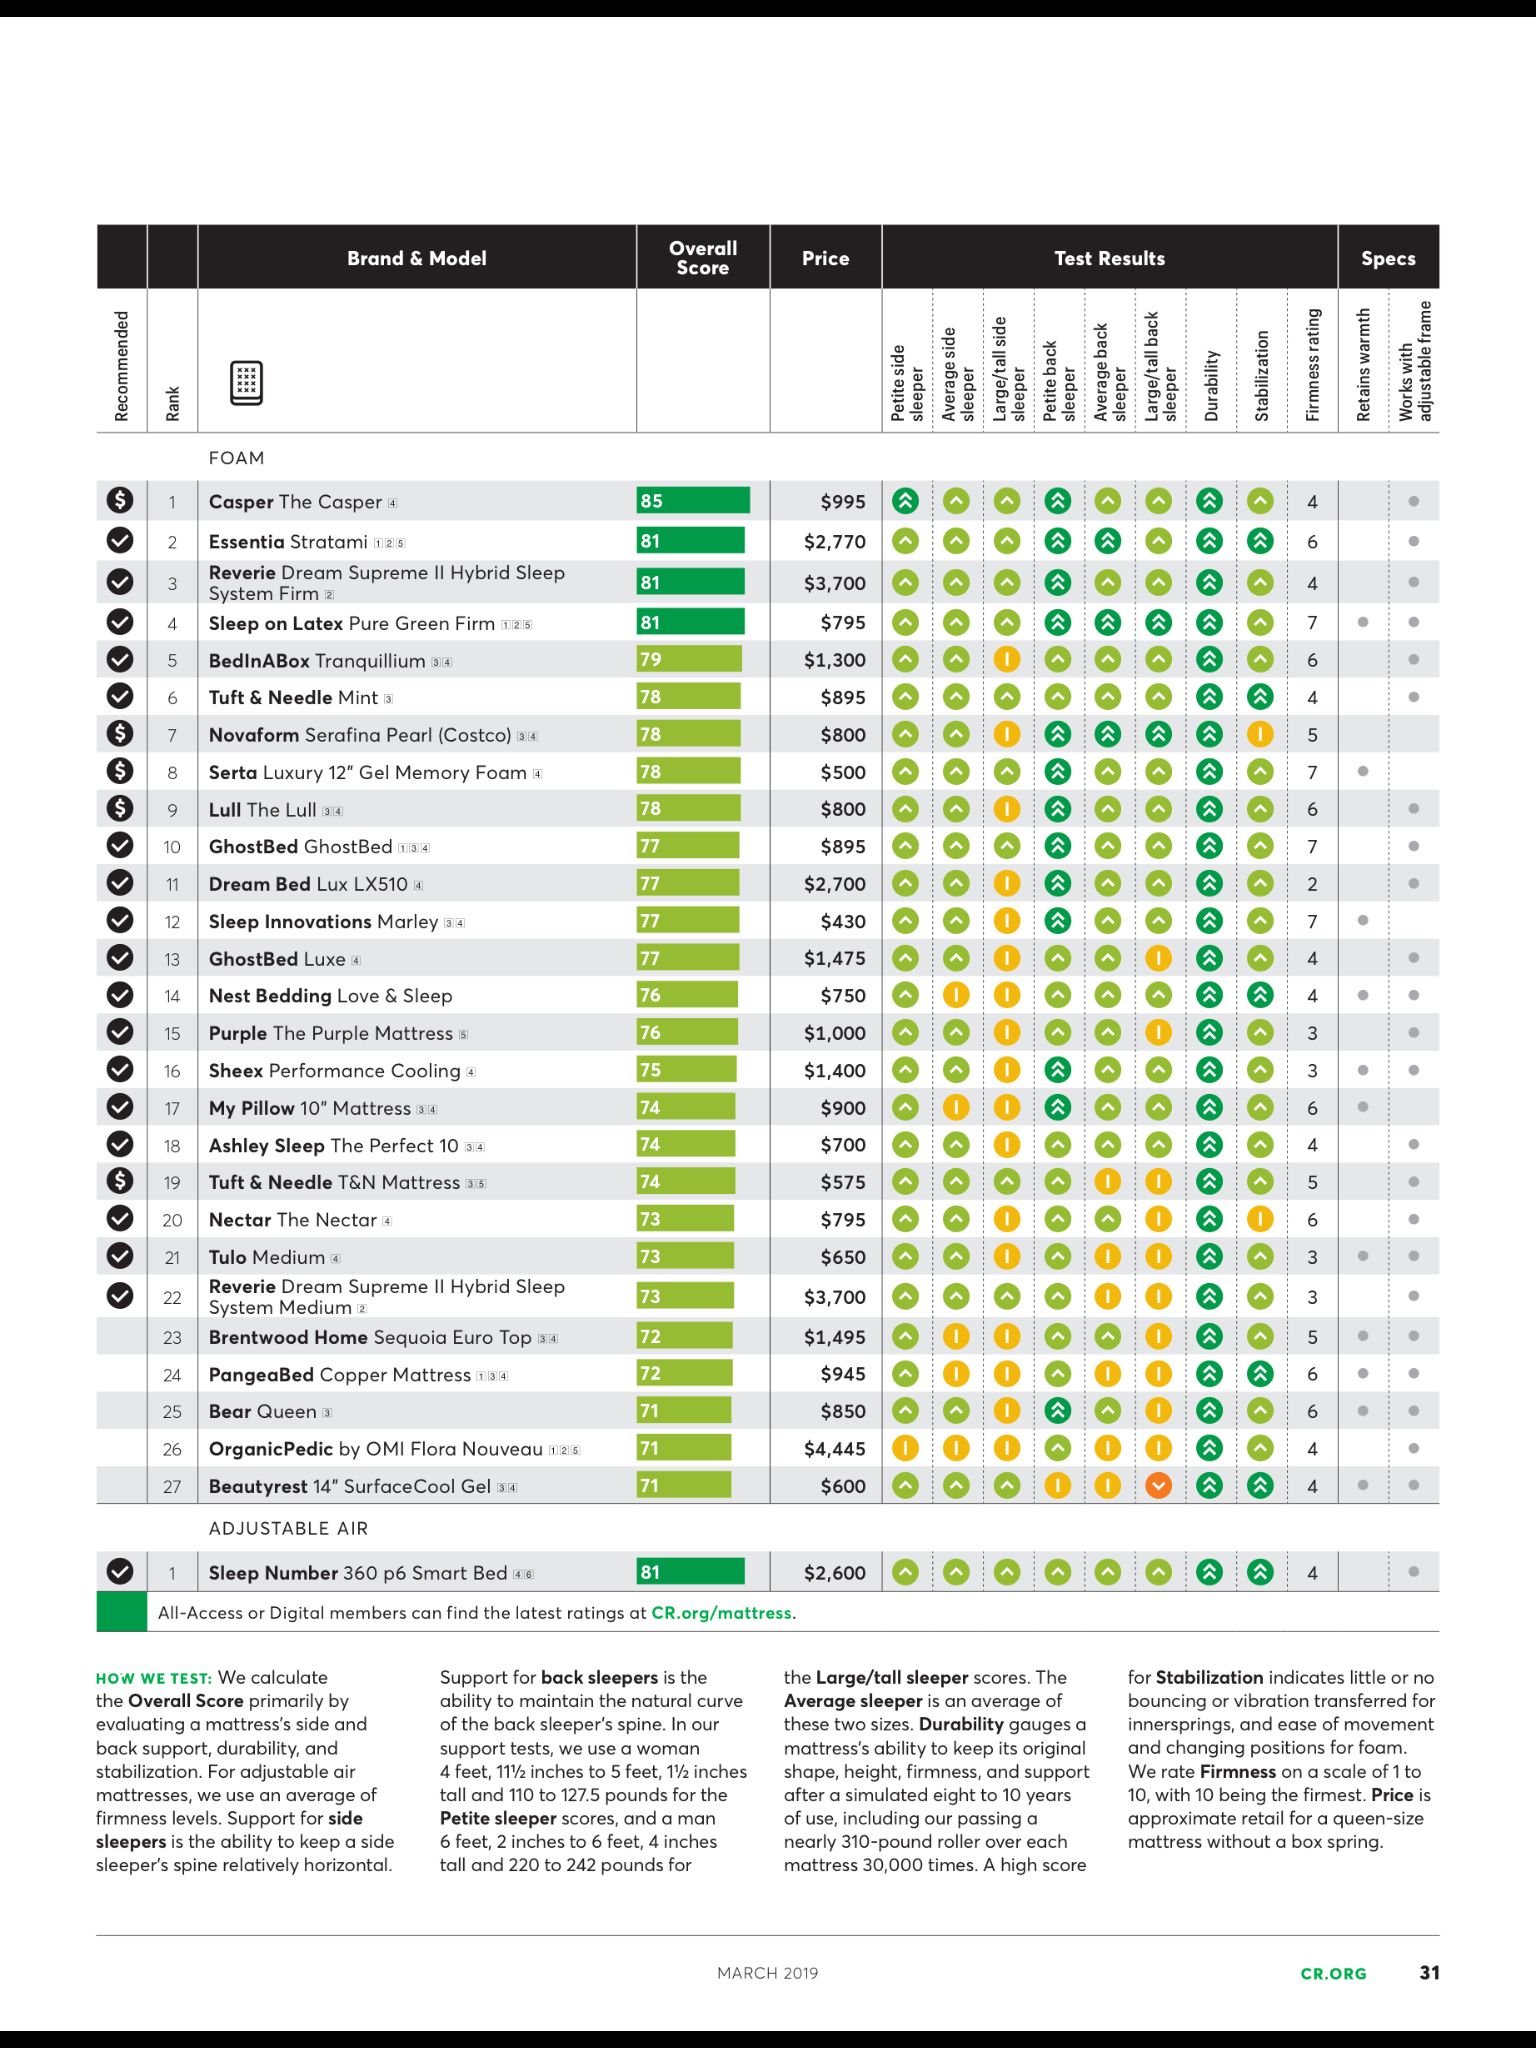 " Get Your Best Rest Yet!"  from Consumer Reports, March ...